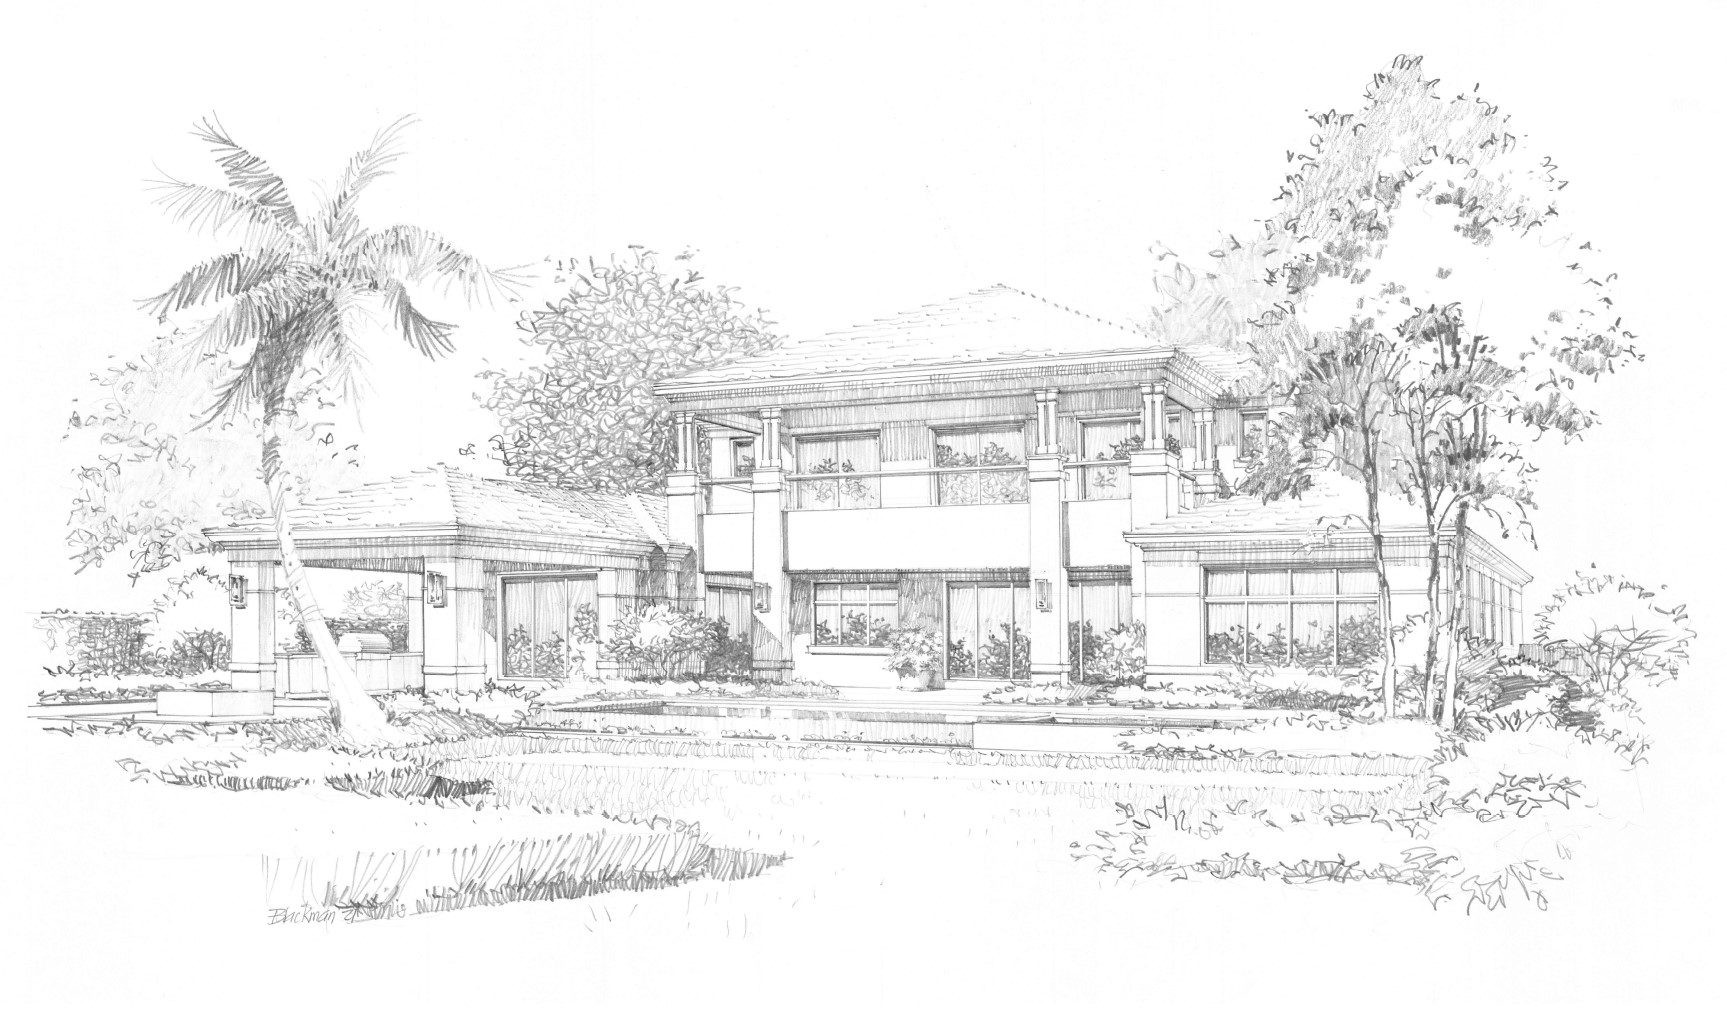 A drawing of a house with trees in the background